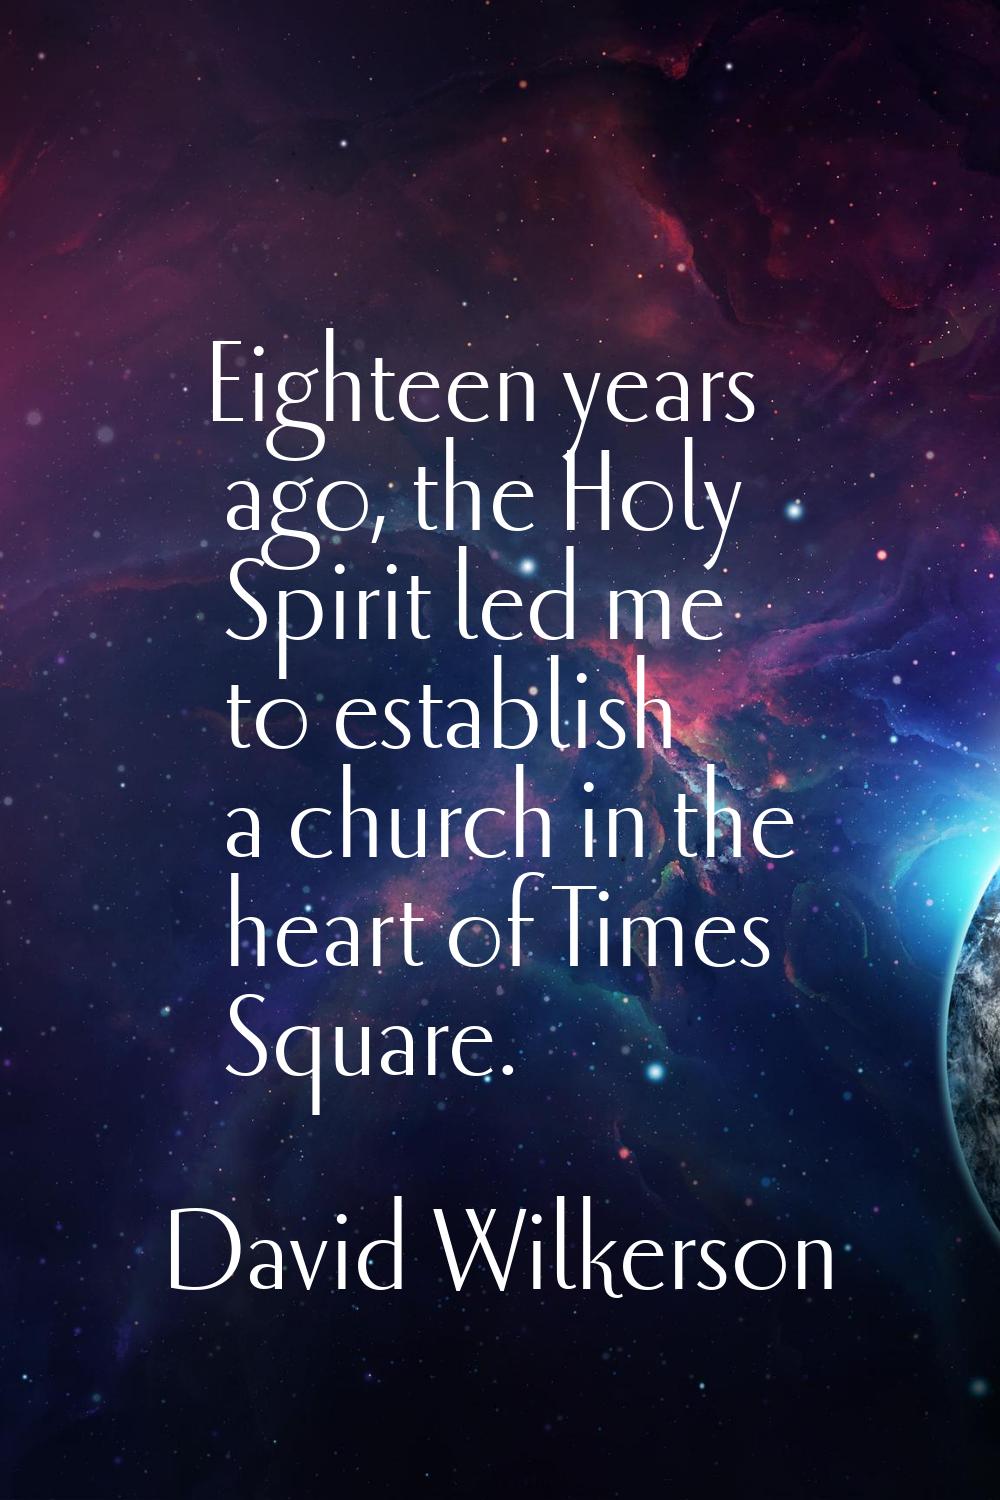 Eighteen years ago, the Holy Spirit led me to establish a church in the heart of Times Square.